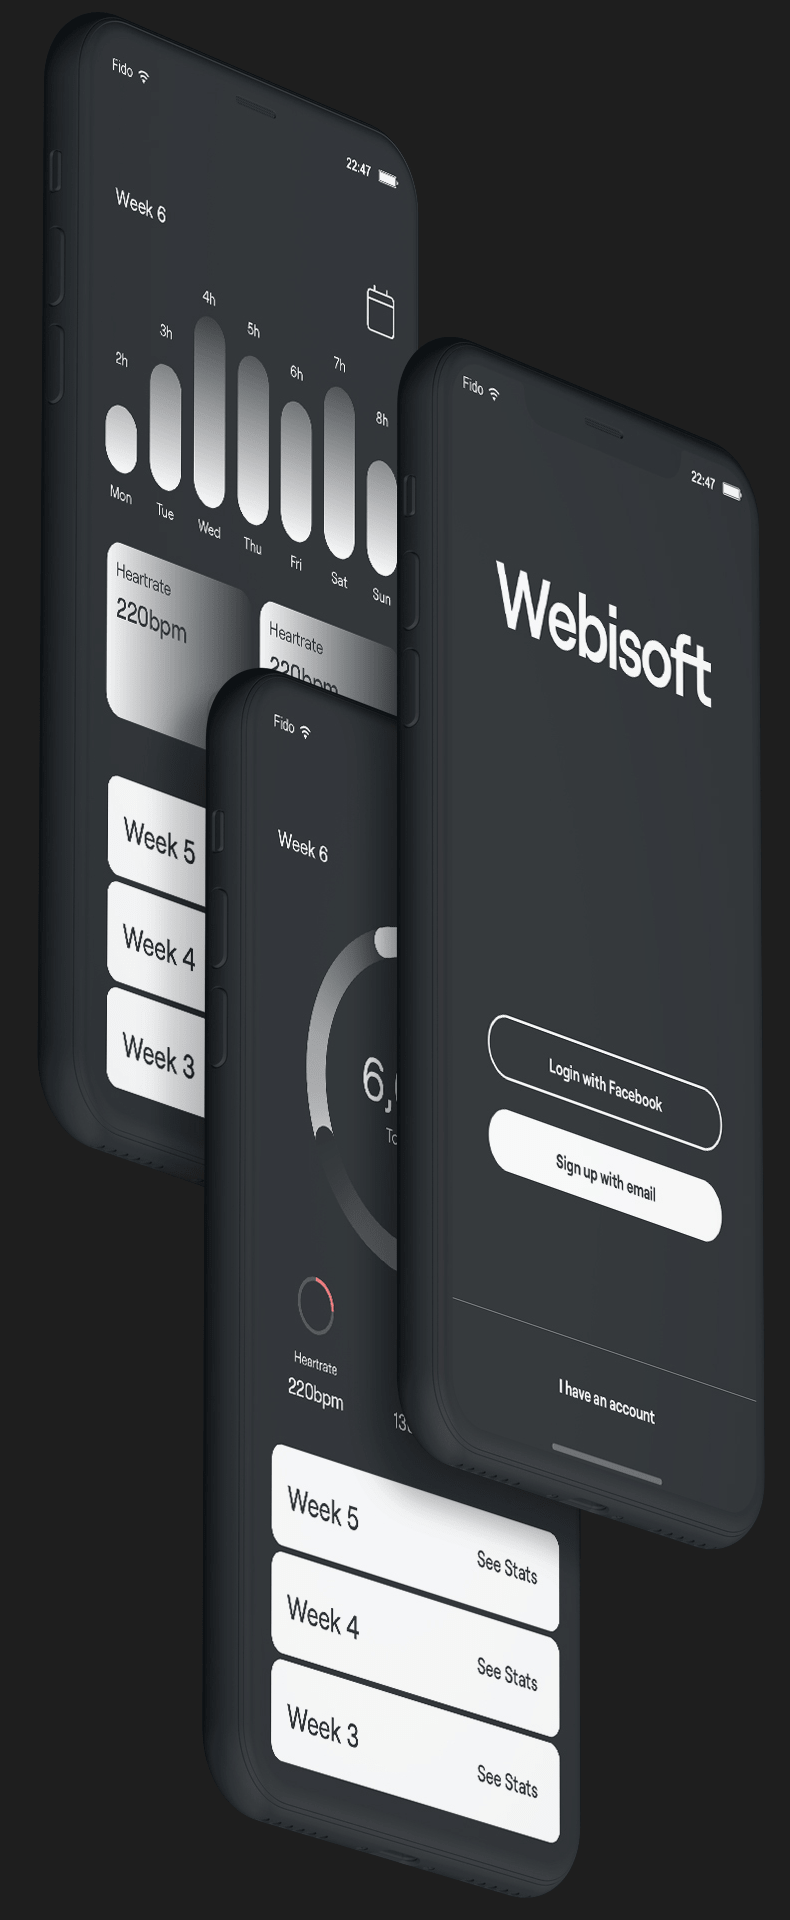 About Webisoft